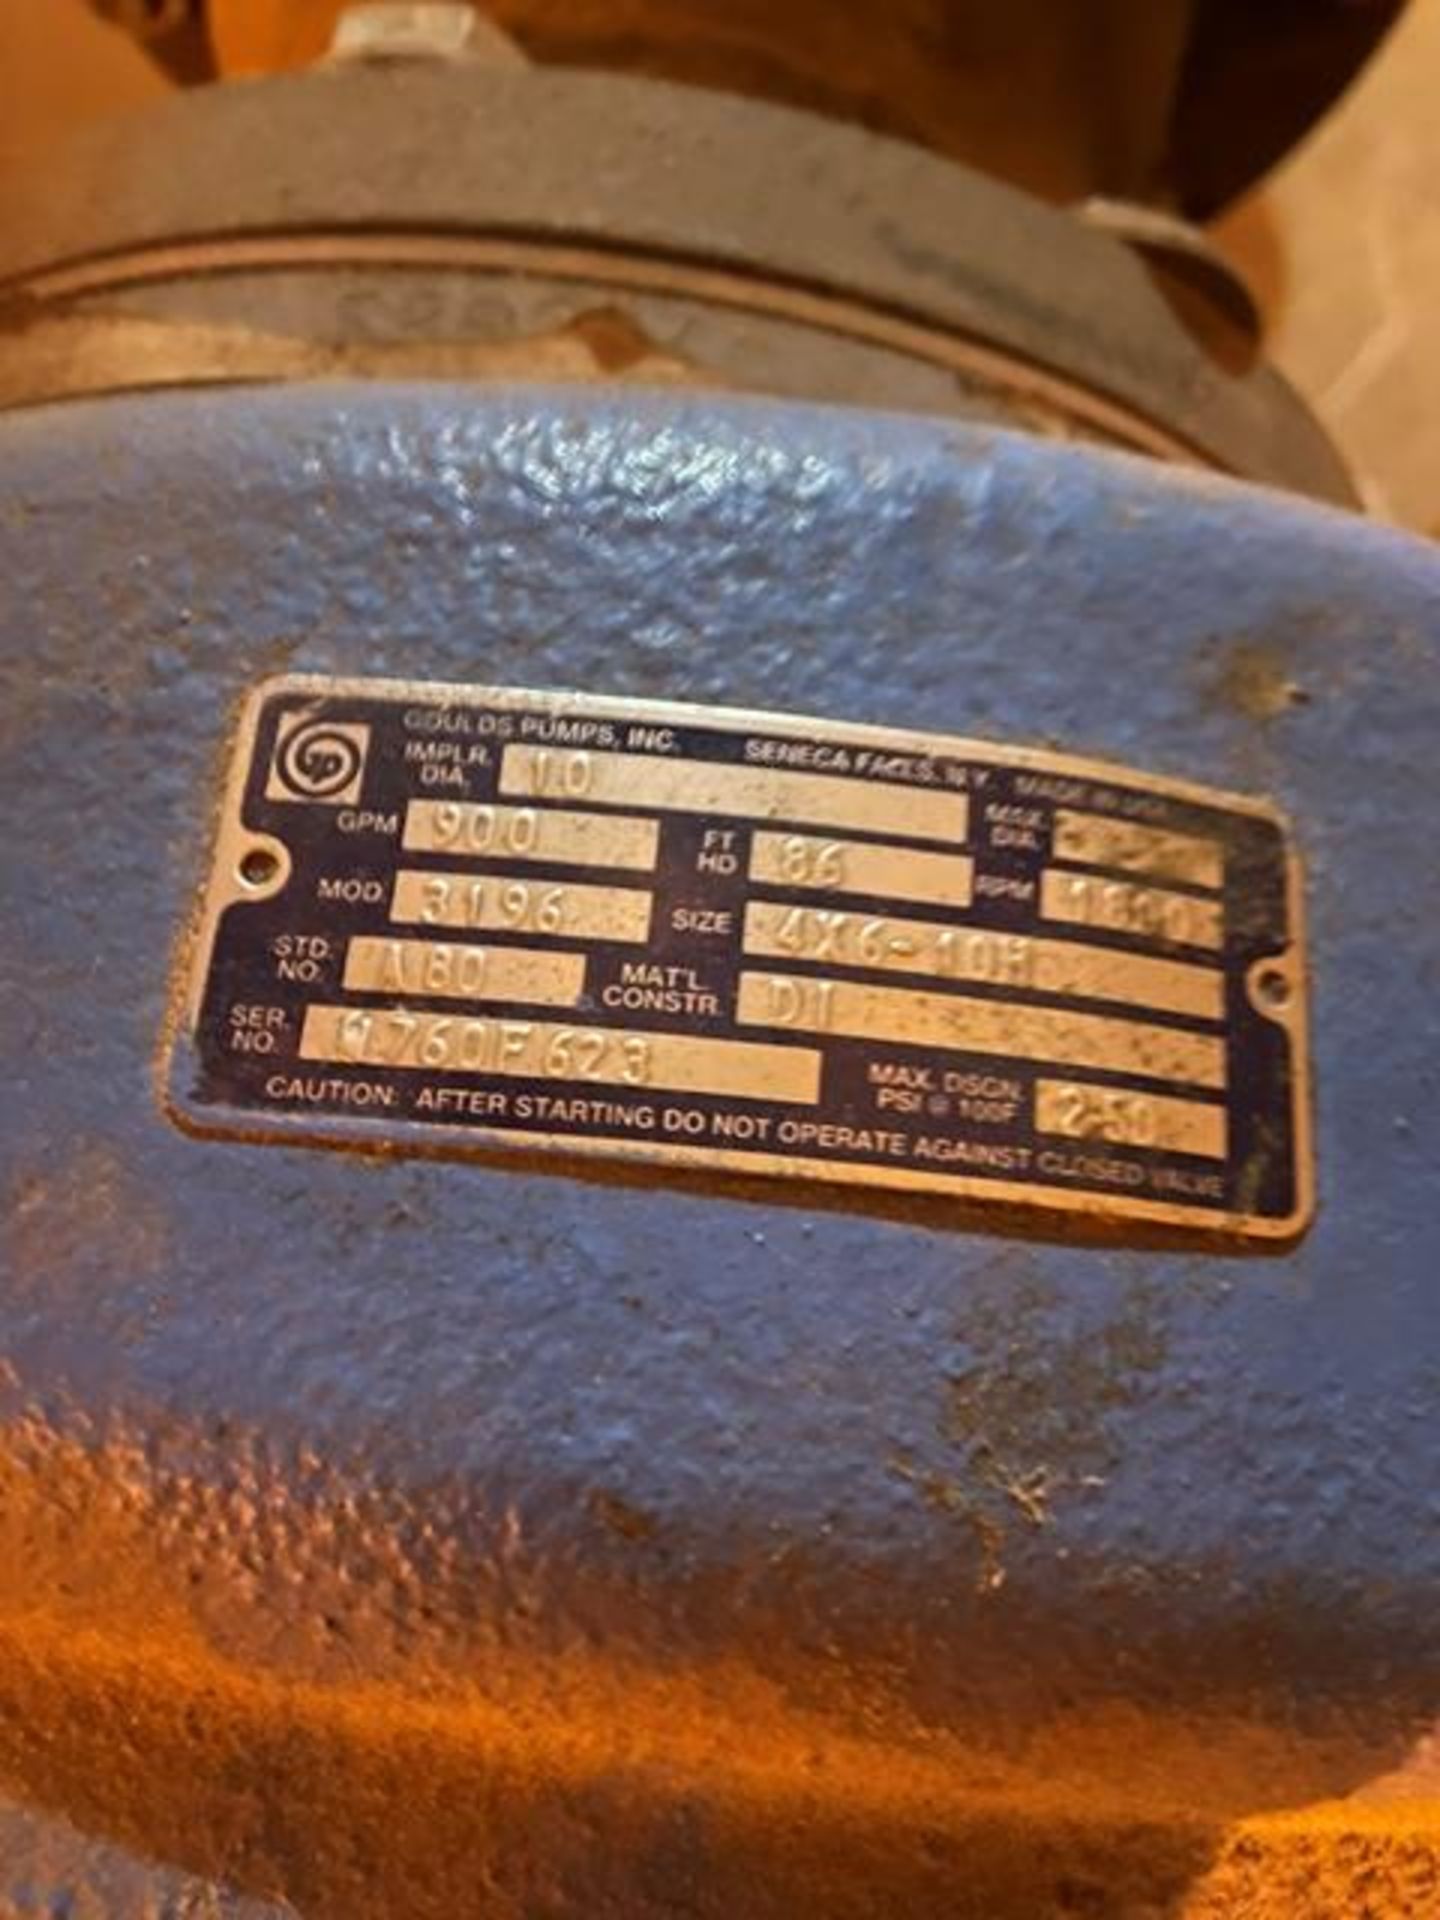 Reliance 30 HP Motor & Goulds 3196 Pump, Rigging & Loading Fee: $325 - Image 4 of 4